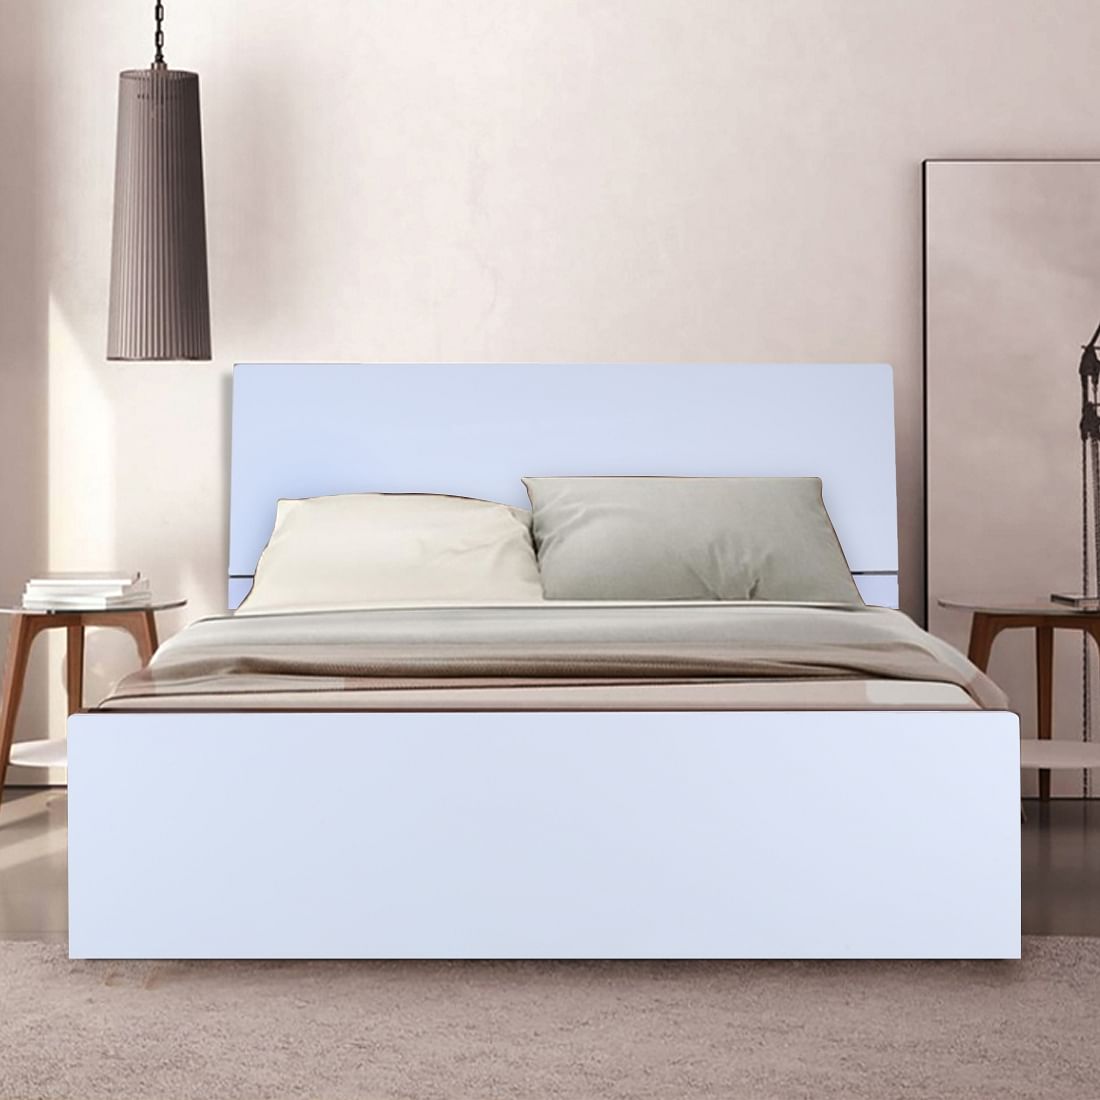 Edwardo King Size Bed in High Gloss White Colour